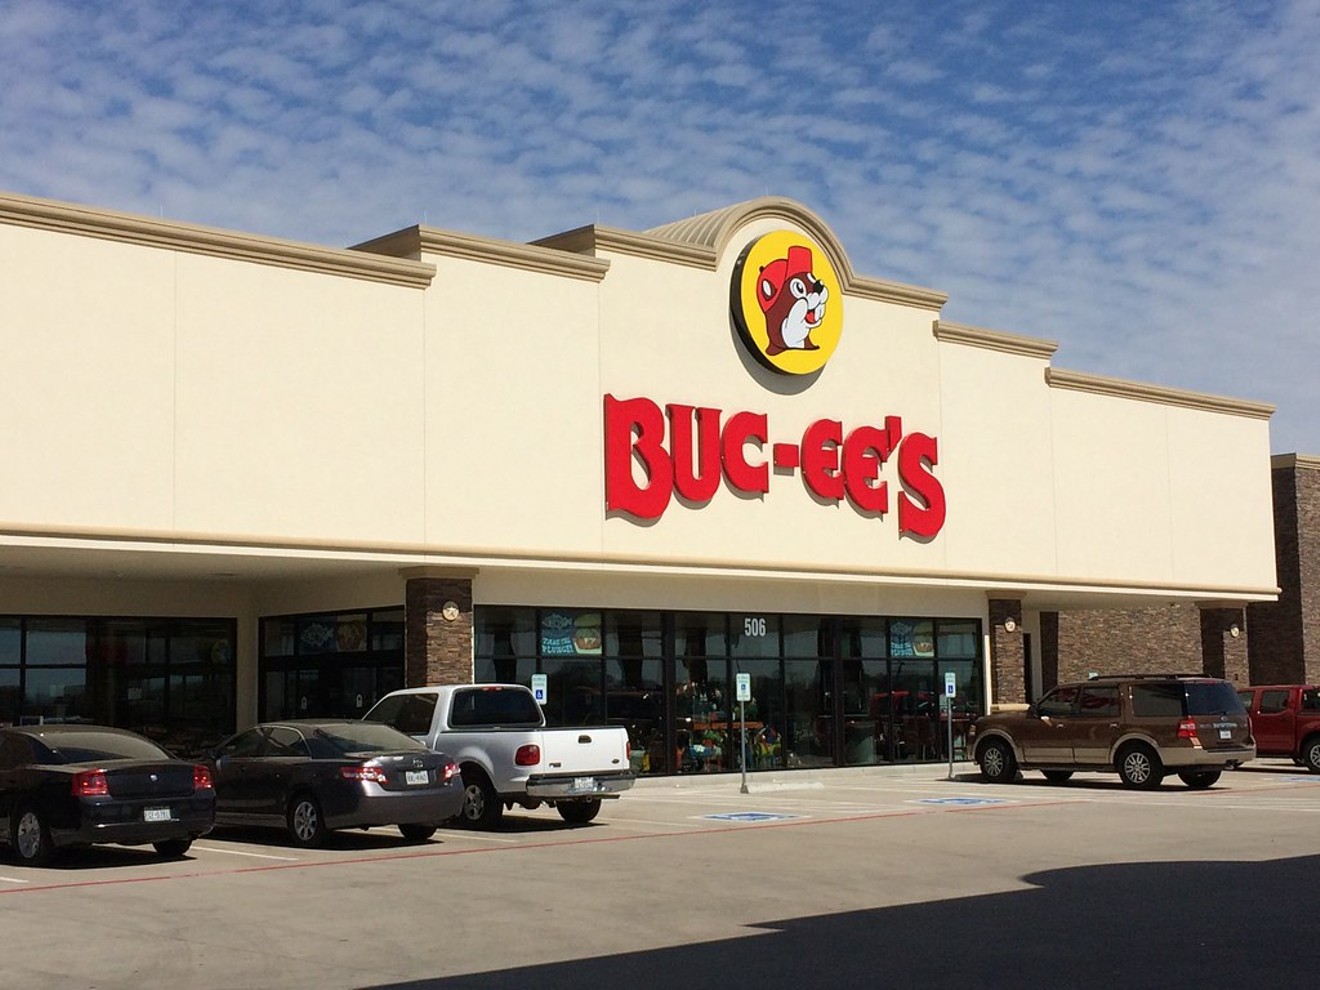 The first Arizona location of Buc-ee's is planned along Interstate 10 in Goodyear.